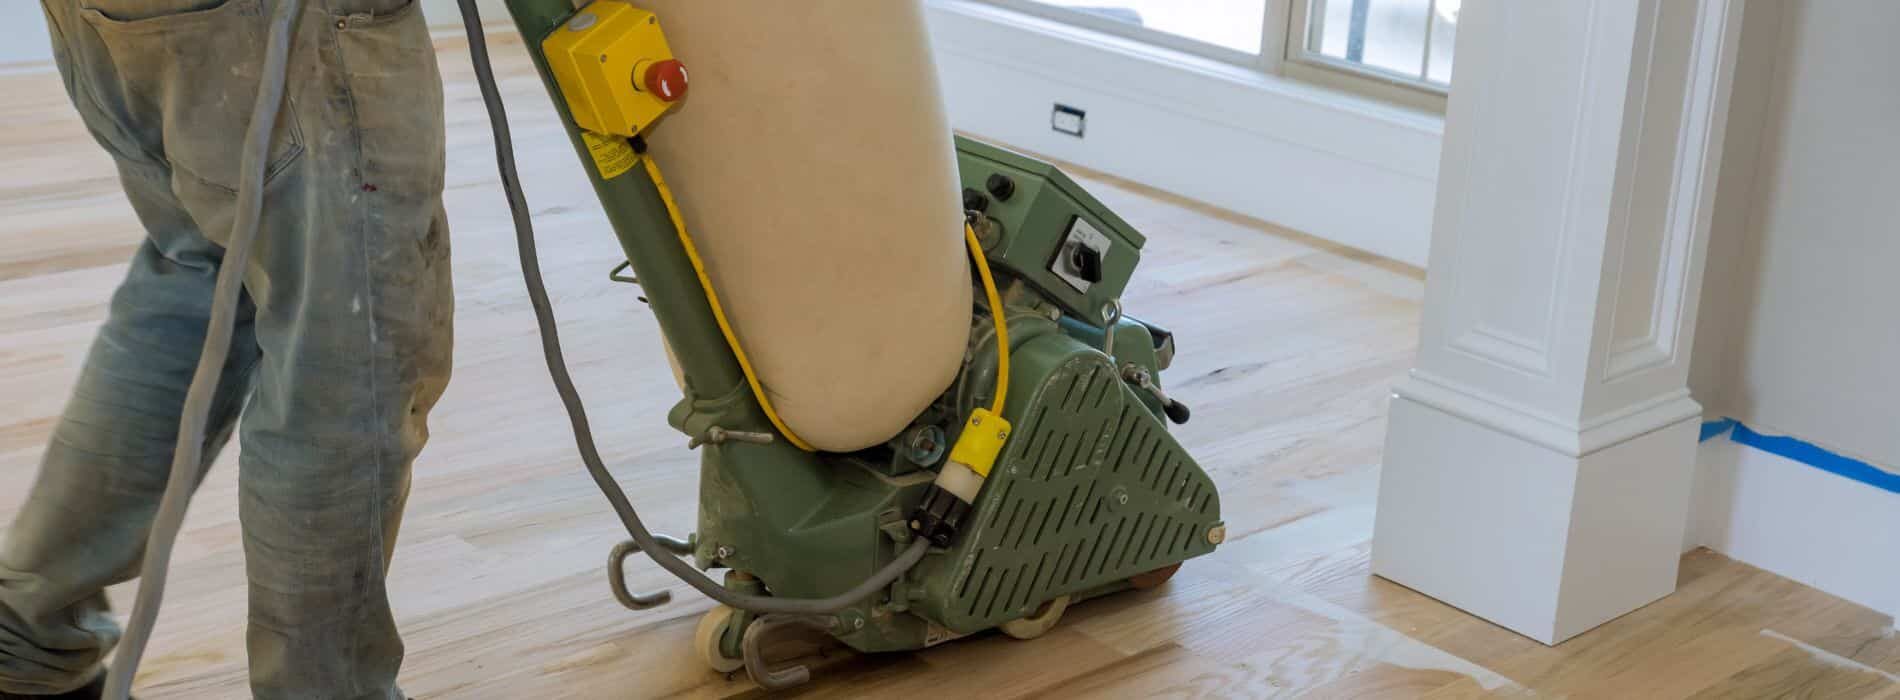 Mr Sander® are using a Bona Scorpion, a 200mm drum sander, to sand a herringbone floor. This powerful machine operates at 1.5 kW and requires a voltage of 240V and a frequency of 50Hz. 